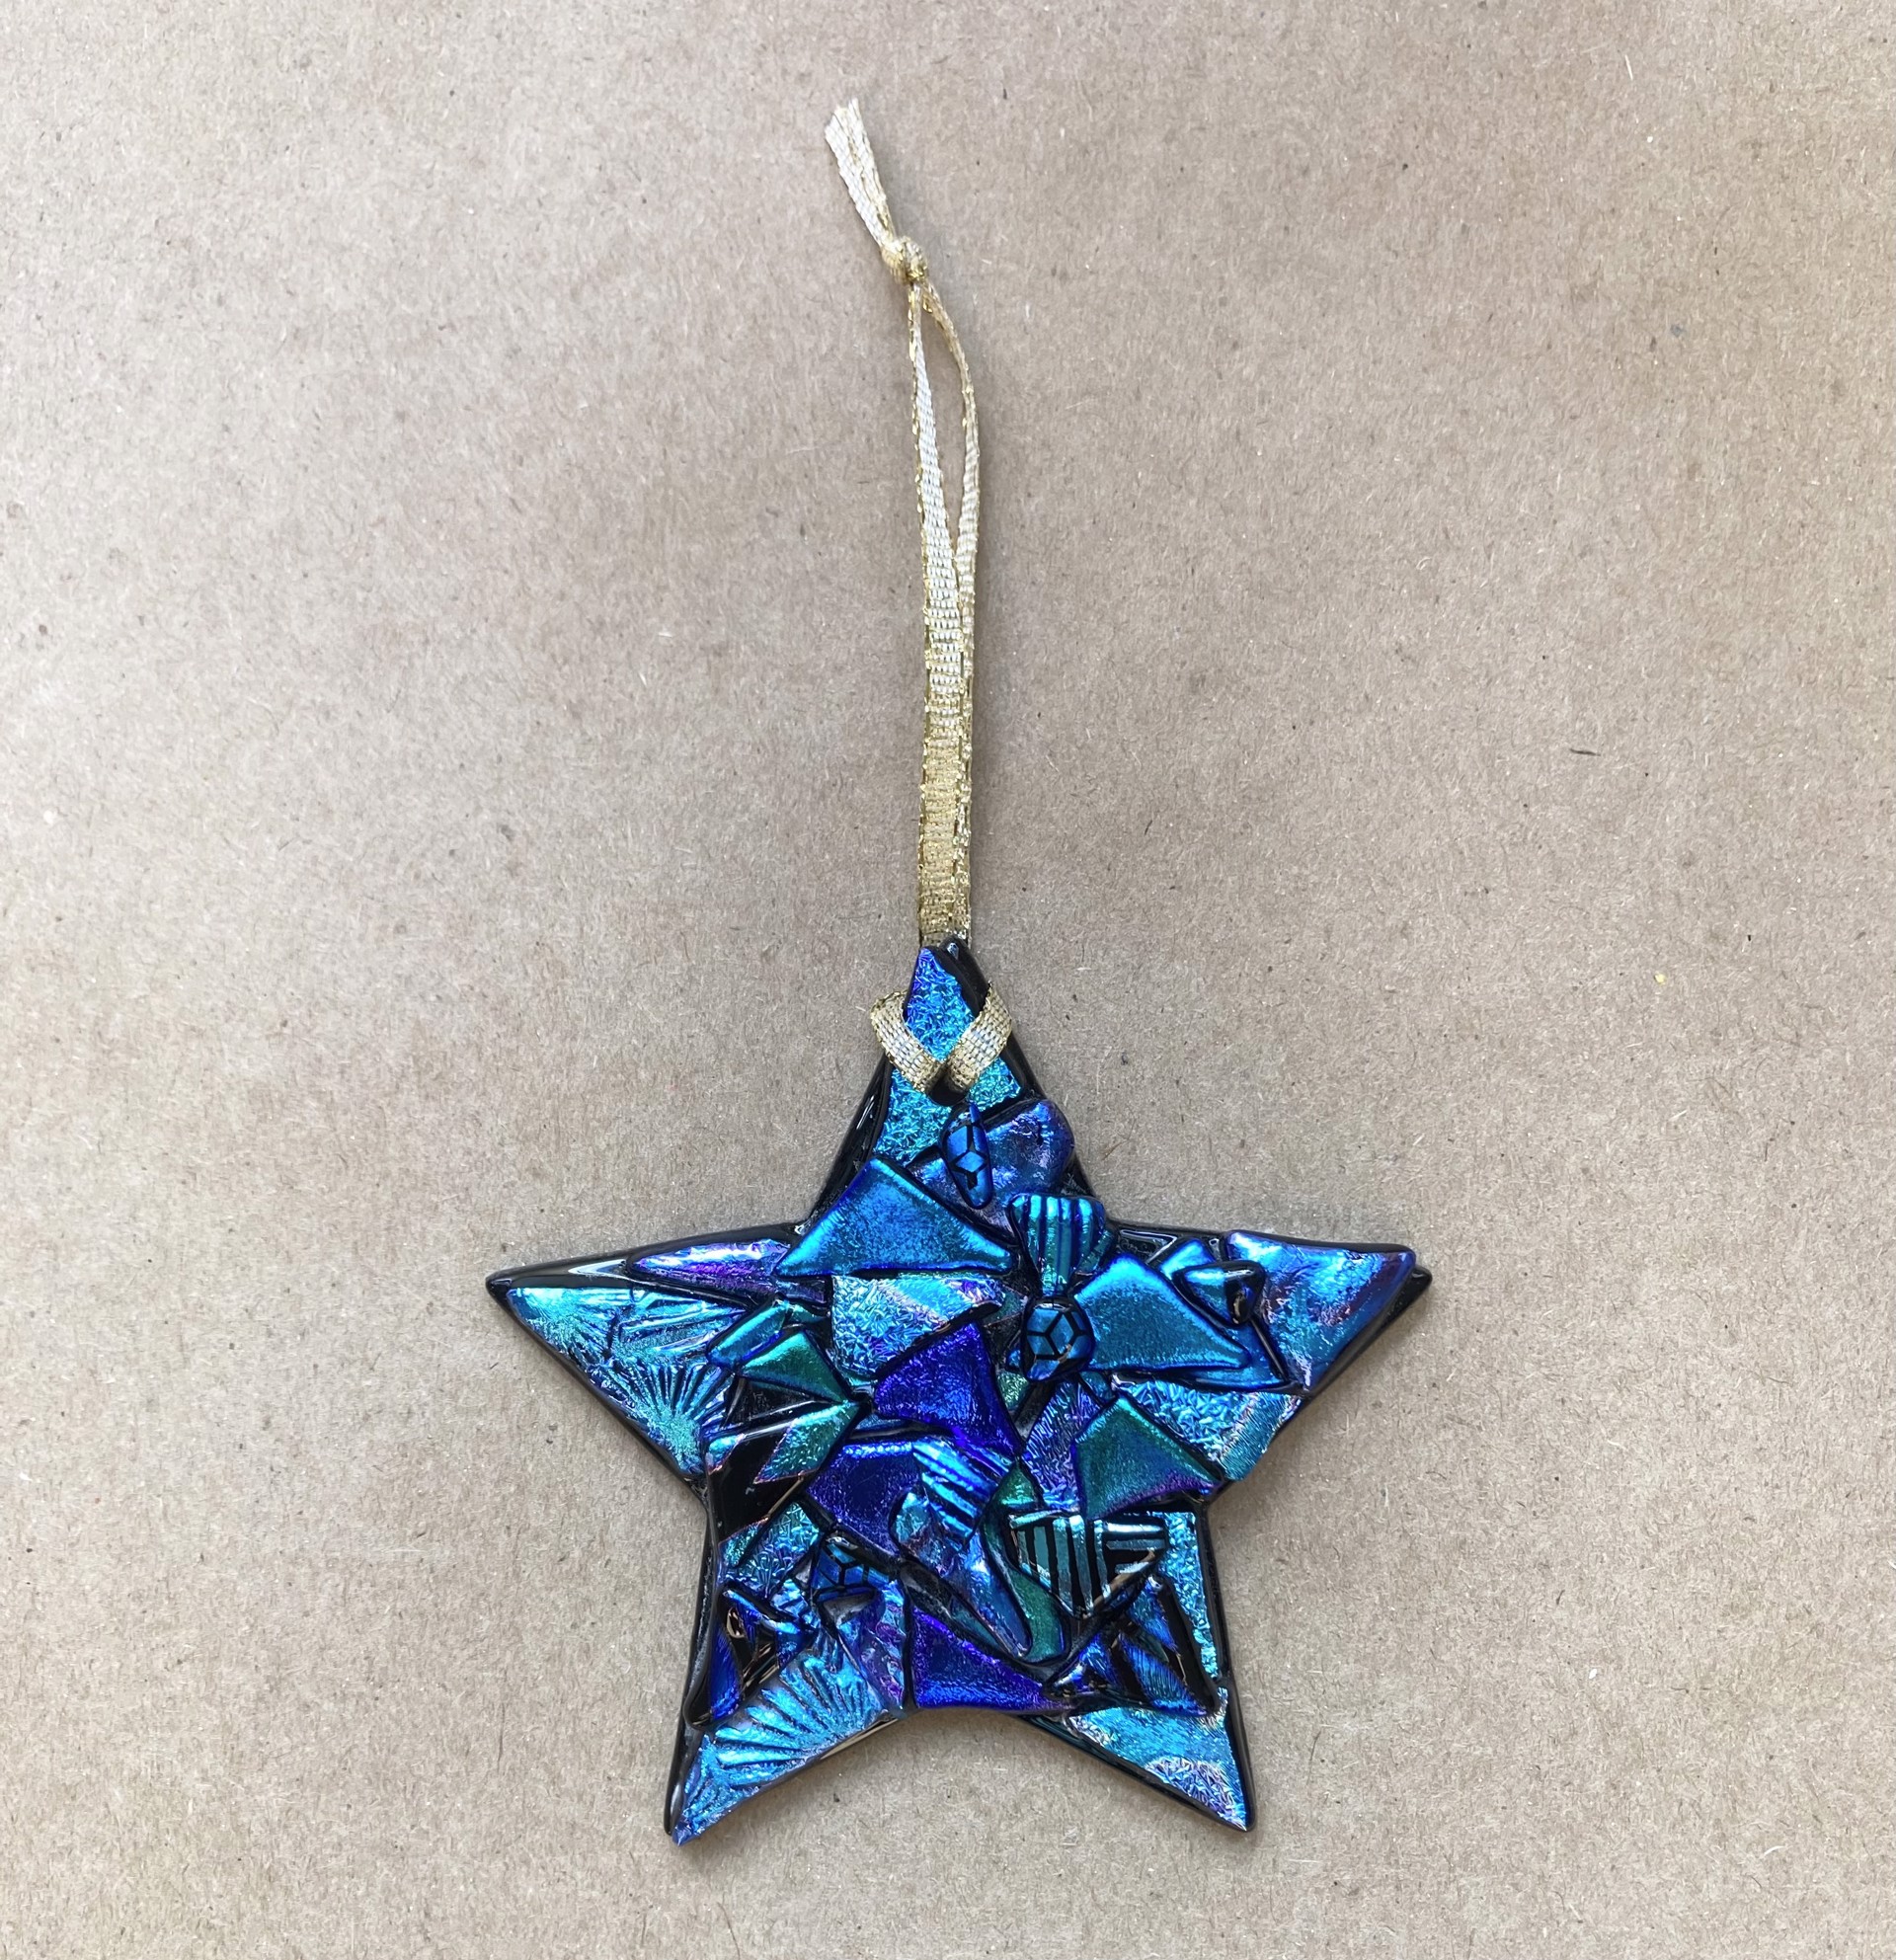 Star Ornament by Doug and Barbara Henderson